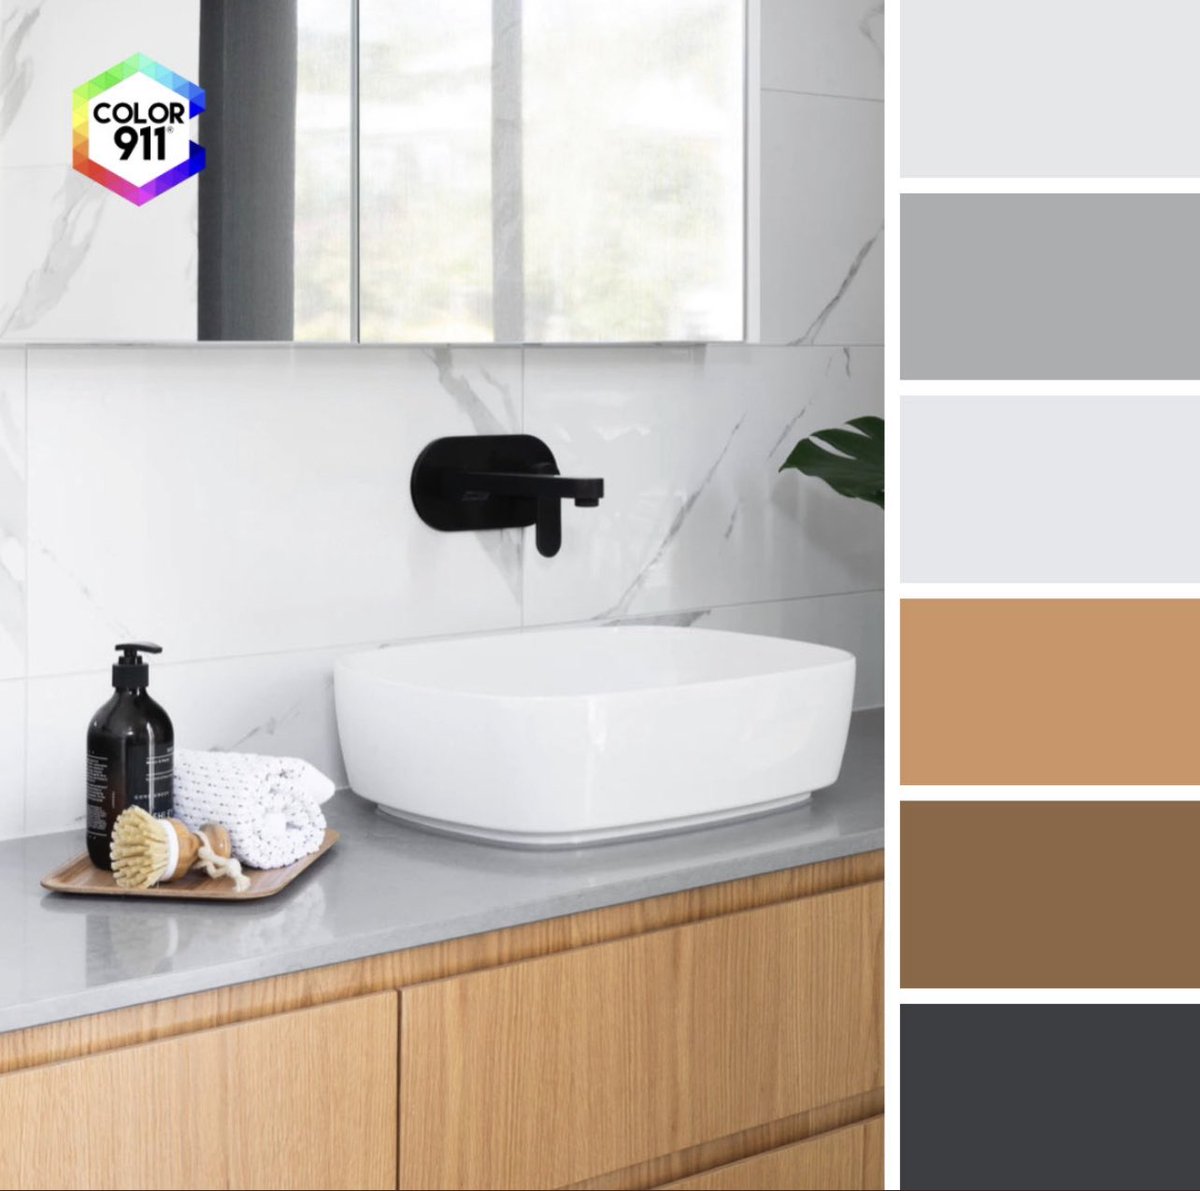 A4 What is great about black and white kitchens and baths is that the wood accent colors really stand out softening the colors in the room #KBtribechat